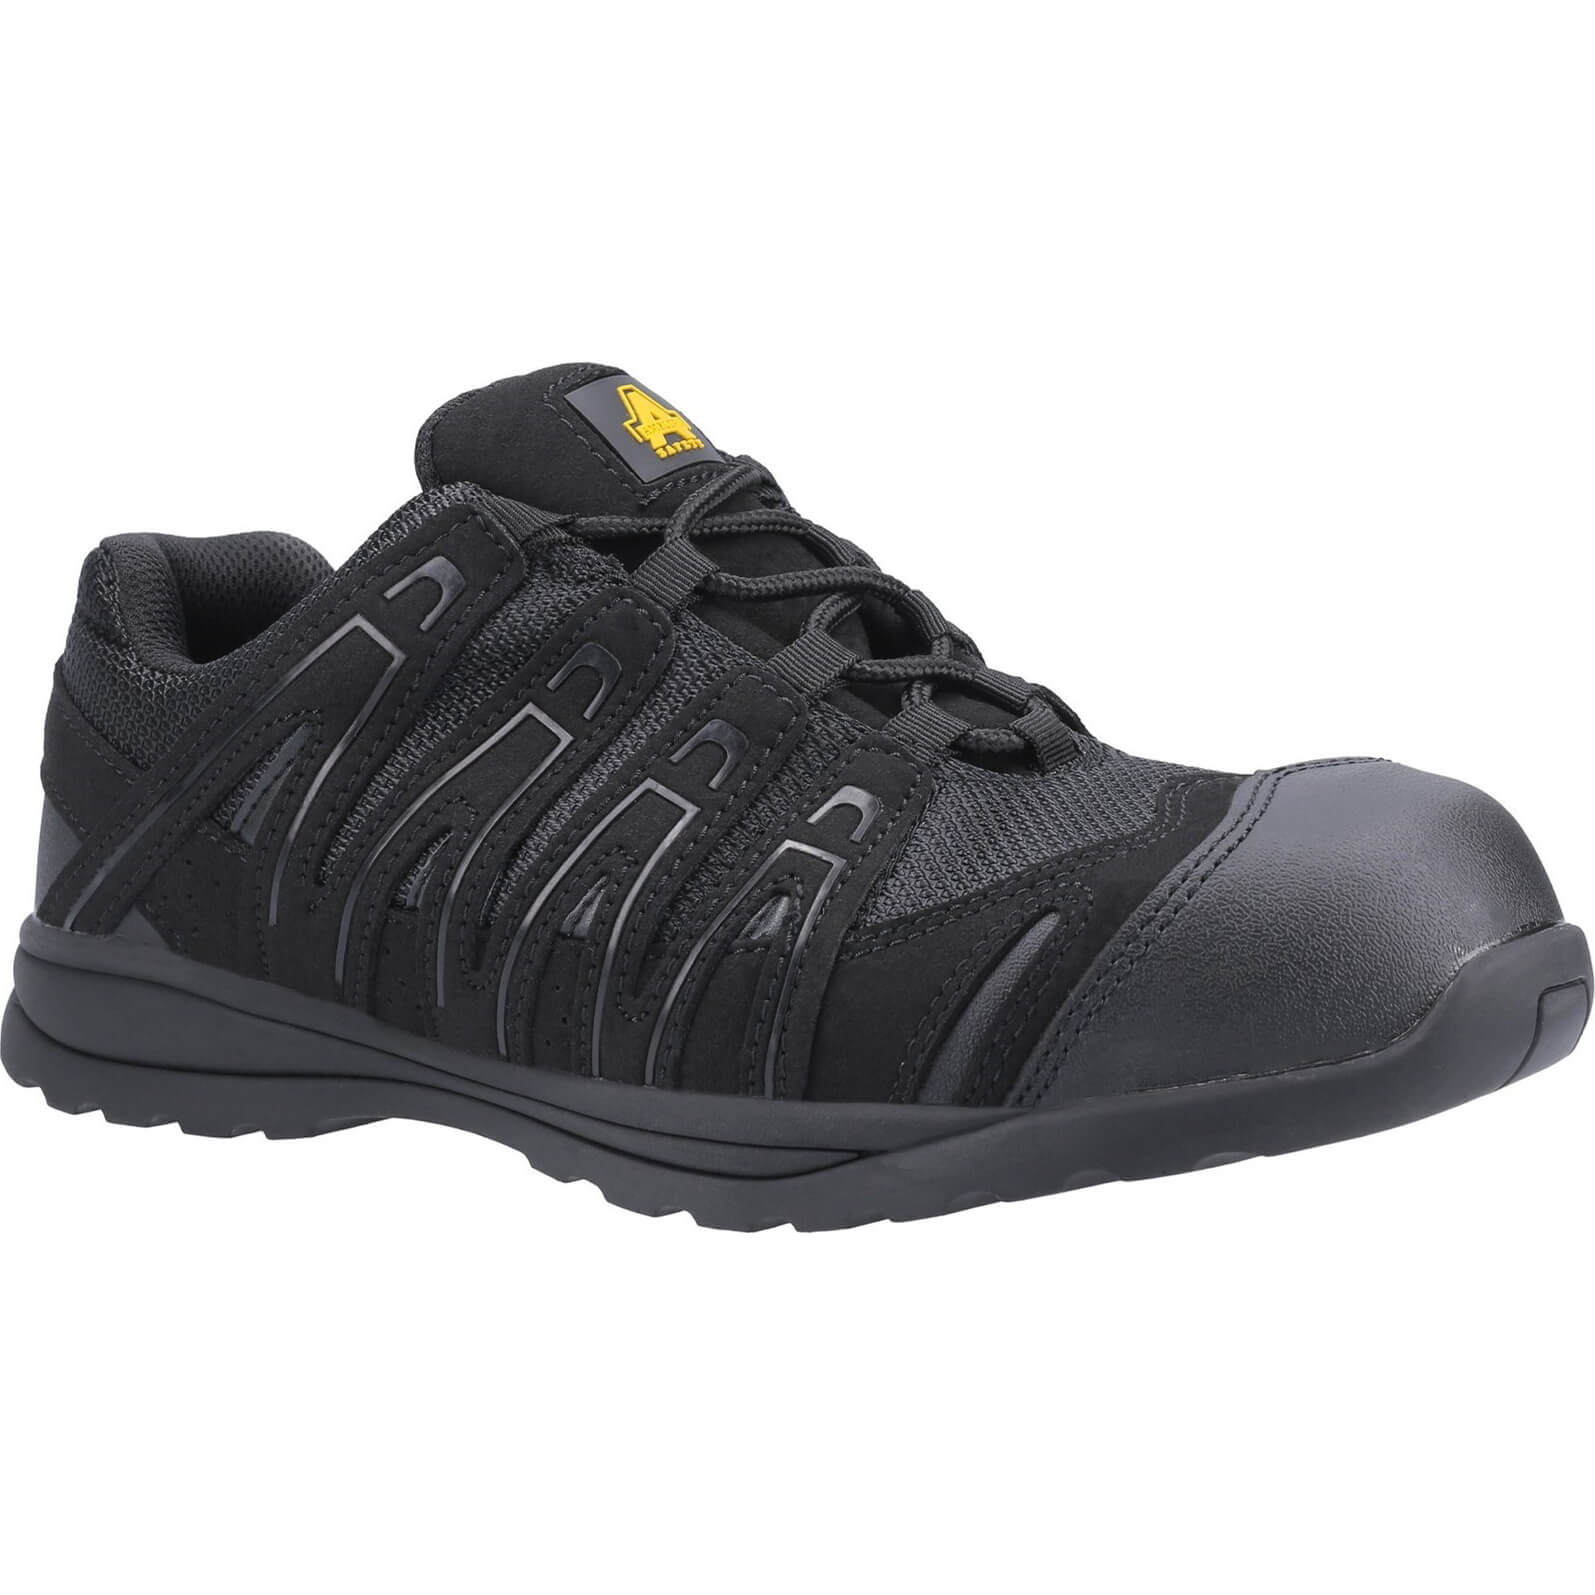 Image of Amblers Safety FS40C Safety Trainers Black Size 6.5